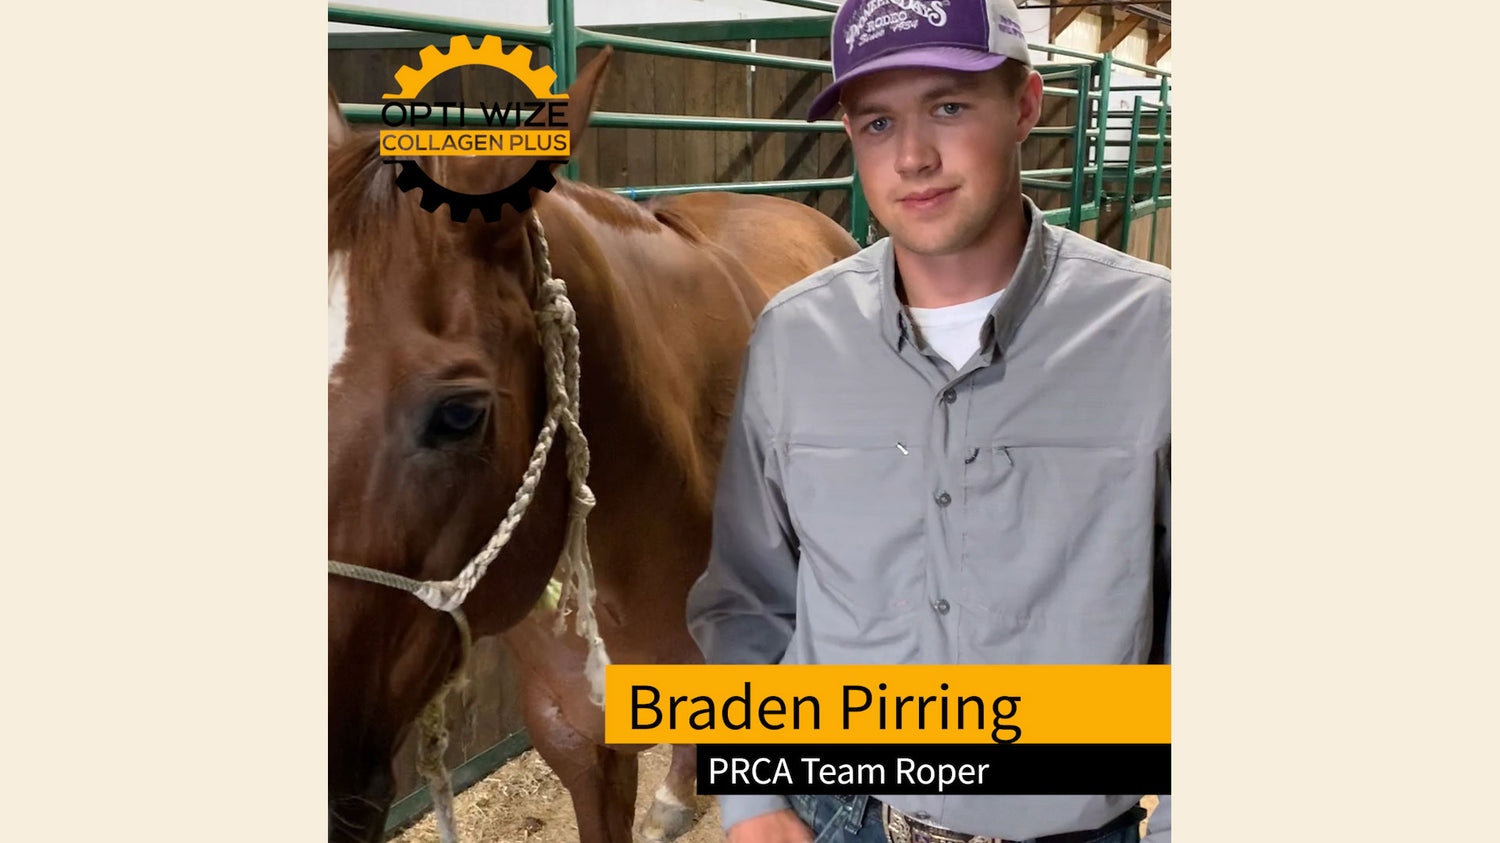 <p>Braden Pirring champion PRCA team roper uses OptiWize for an equine fractured Coffin bone.</p>